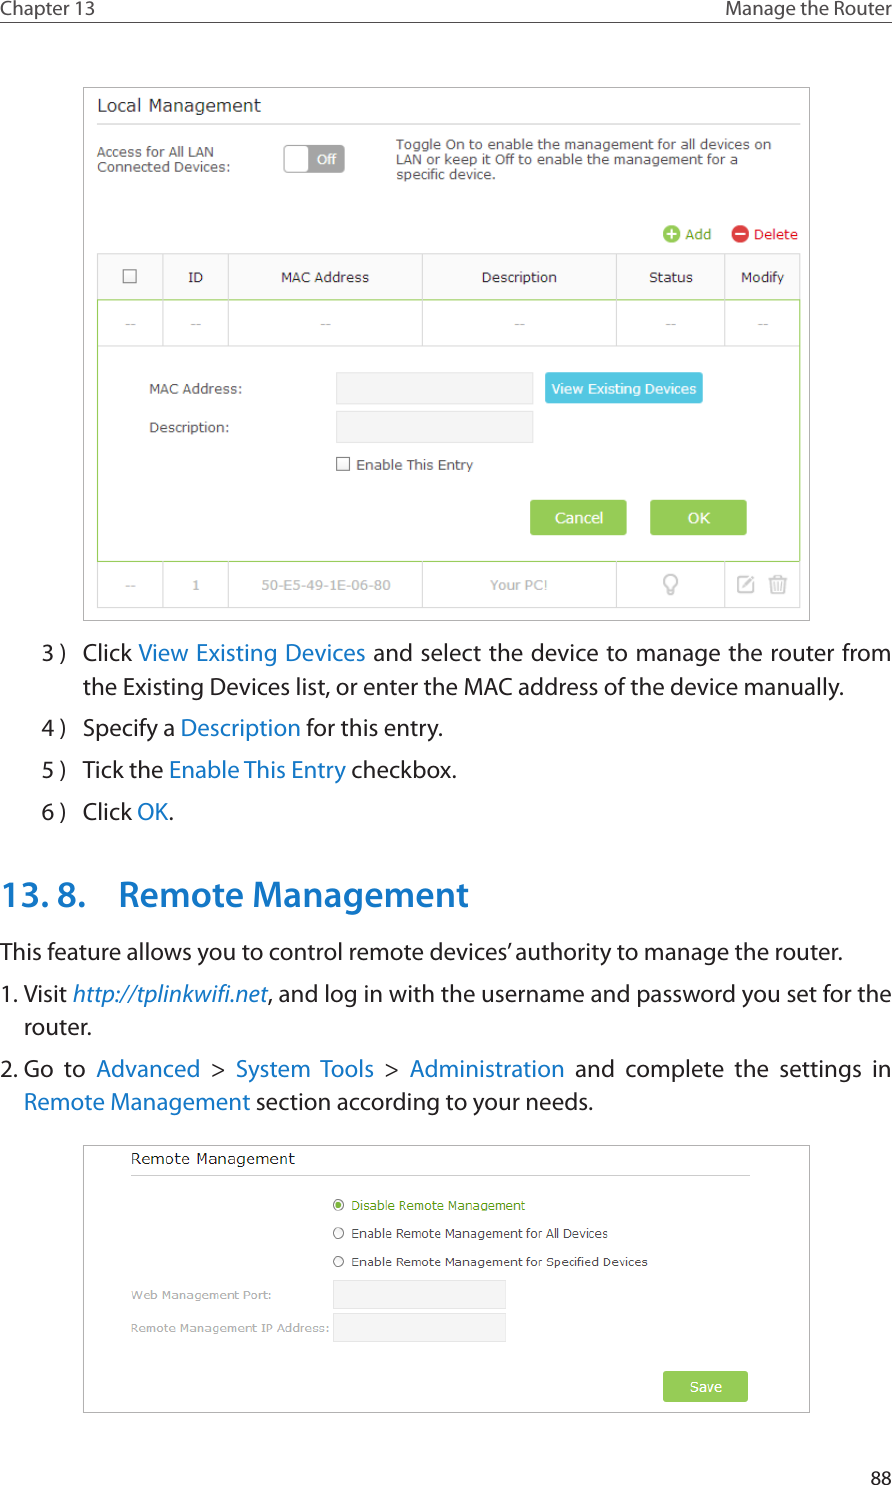 88Chapter 13 Manage the Router 3 )  Click View Existing Devices and select the device to manage the router from the Existing Devices list, or enter the MAC address of the device manually.4 )  Specify a Description for this entry.5 )  Tick the Enable This Entry checkbox.6 )  Click OK.13. 8.  Remote ManagementThis feature allows you to control remote devices’ authority to manage the router.1. Visit http://tplinkwifi.net, and log in with the username and password you set for the router.2. Go to Advanced &gt; System Tools &gt;  Administration and complete the settings in Remote Management section according to your needs.